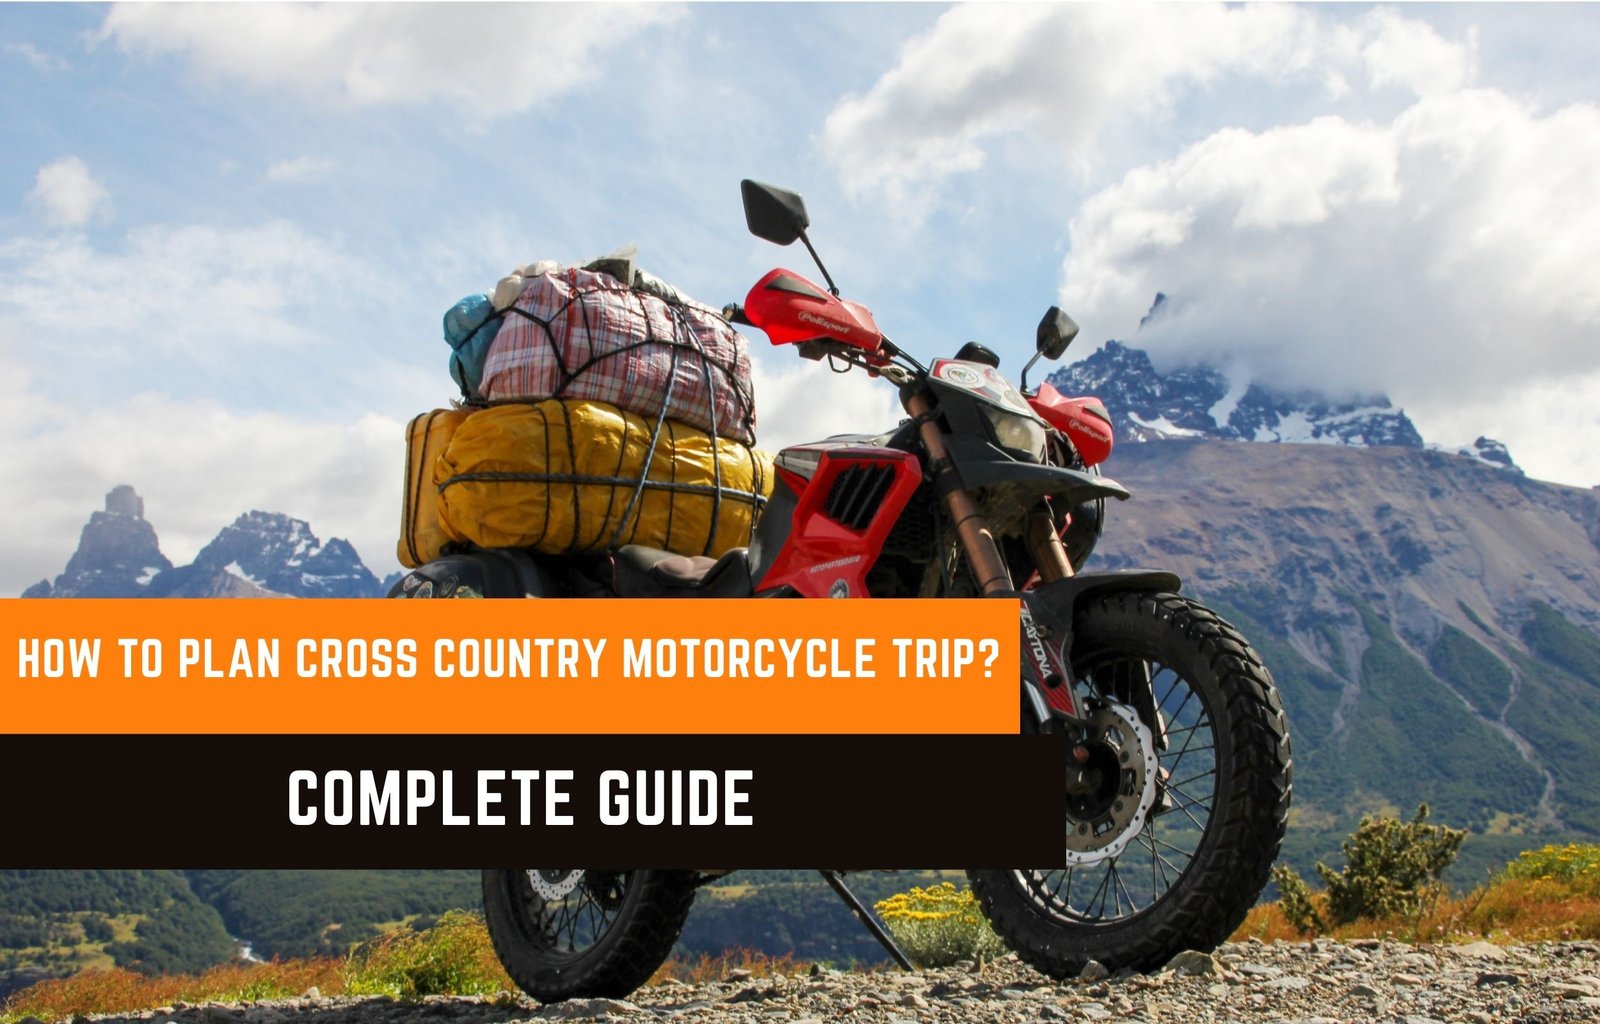 How to Plan Cross Country Motorcycle Trip